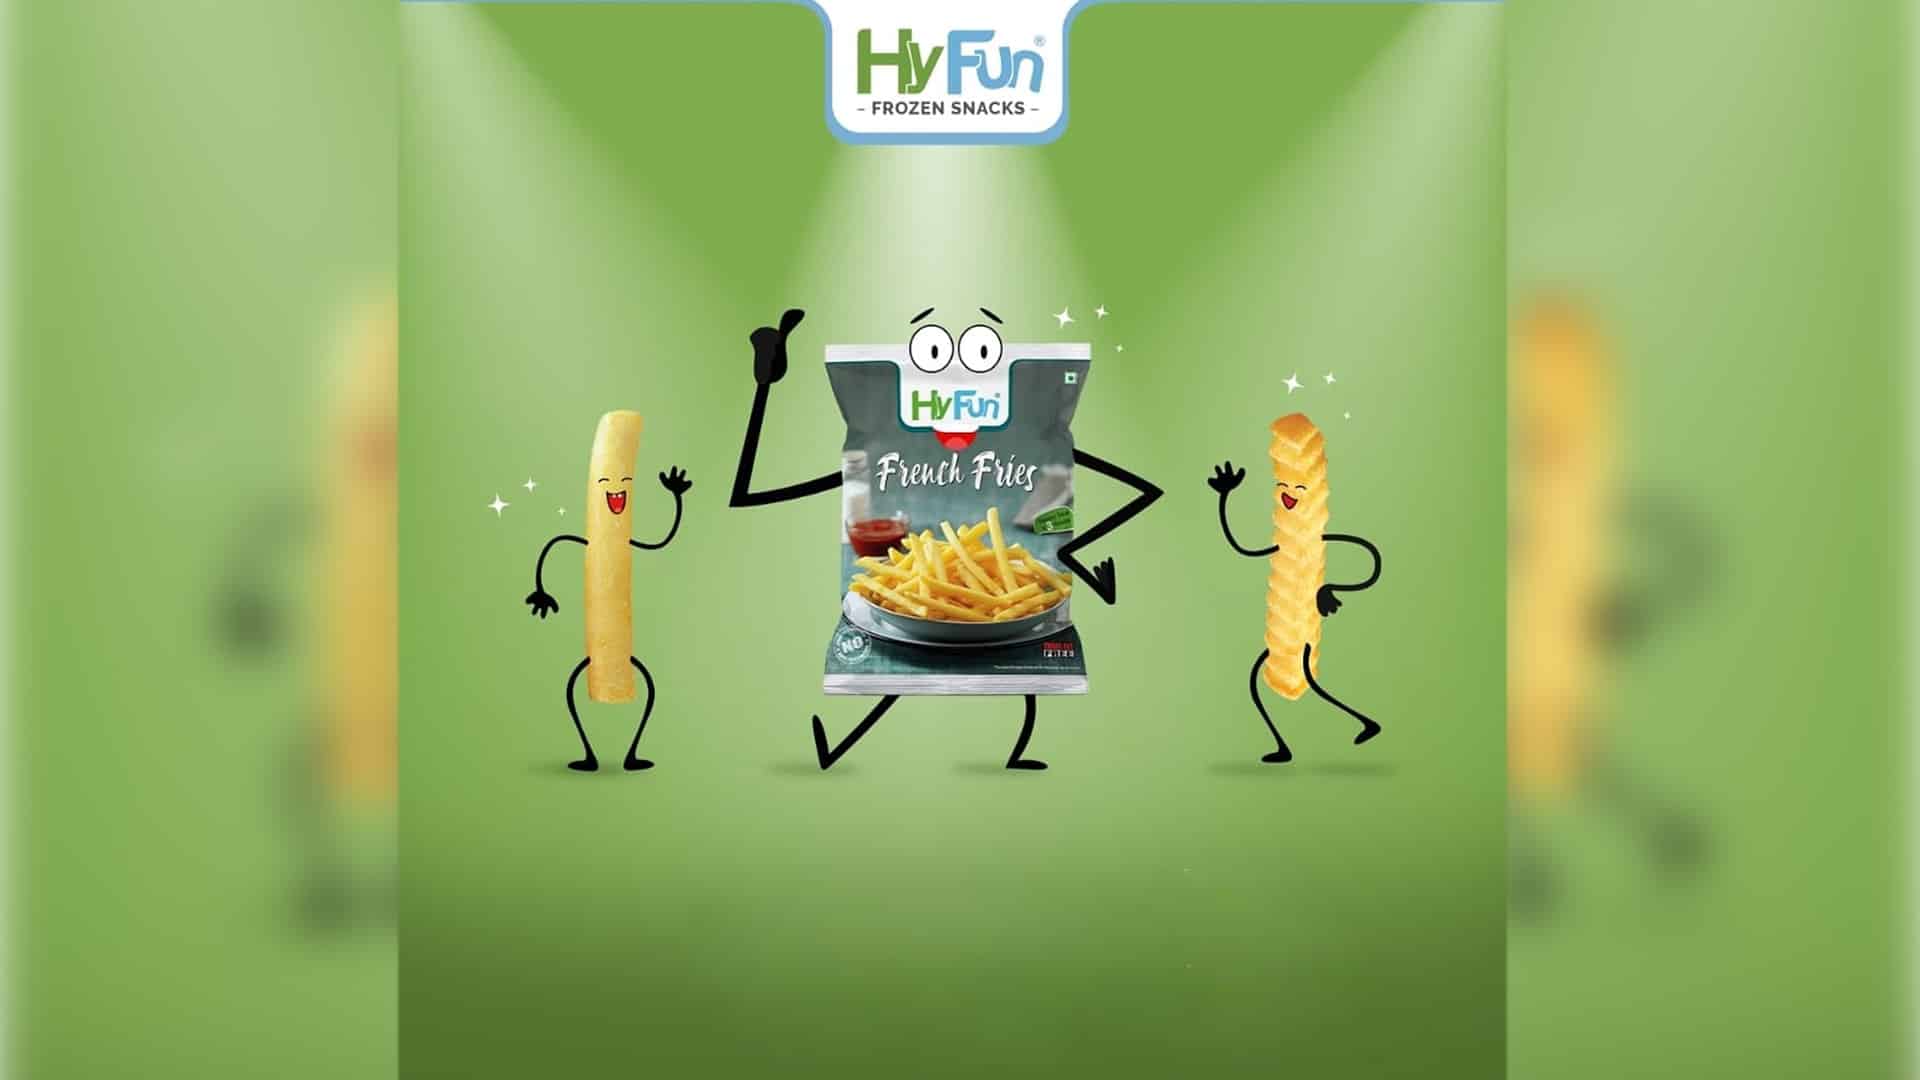 Potato processing firm HyFun will invest Rs 300 cr to expand its manufacturing capacity